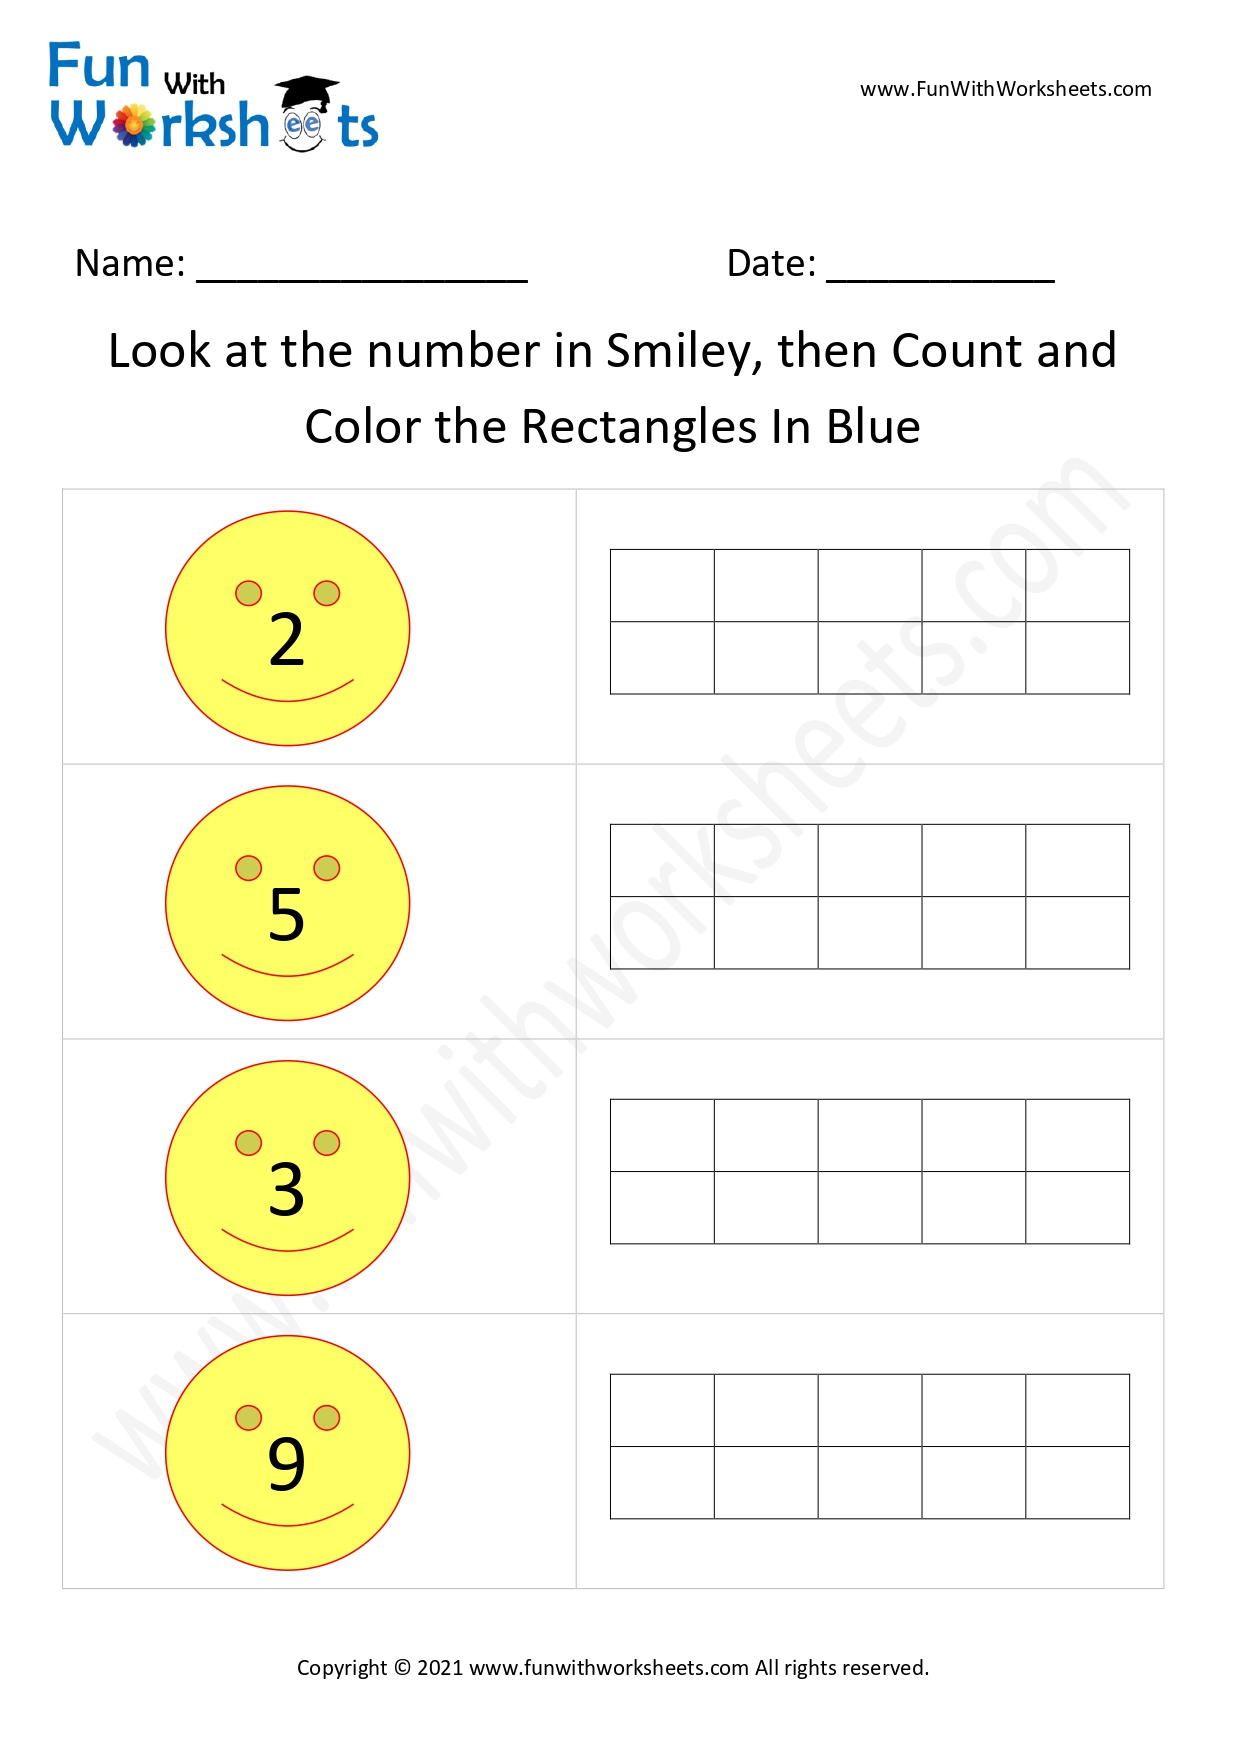 count-and-color-practice-worksheets-free-printable-worksheets